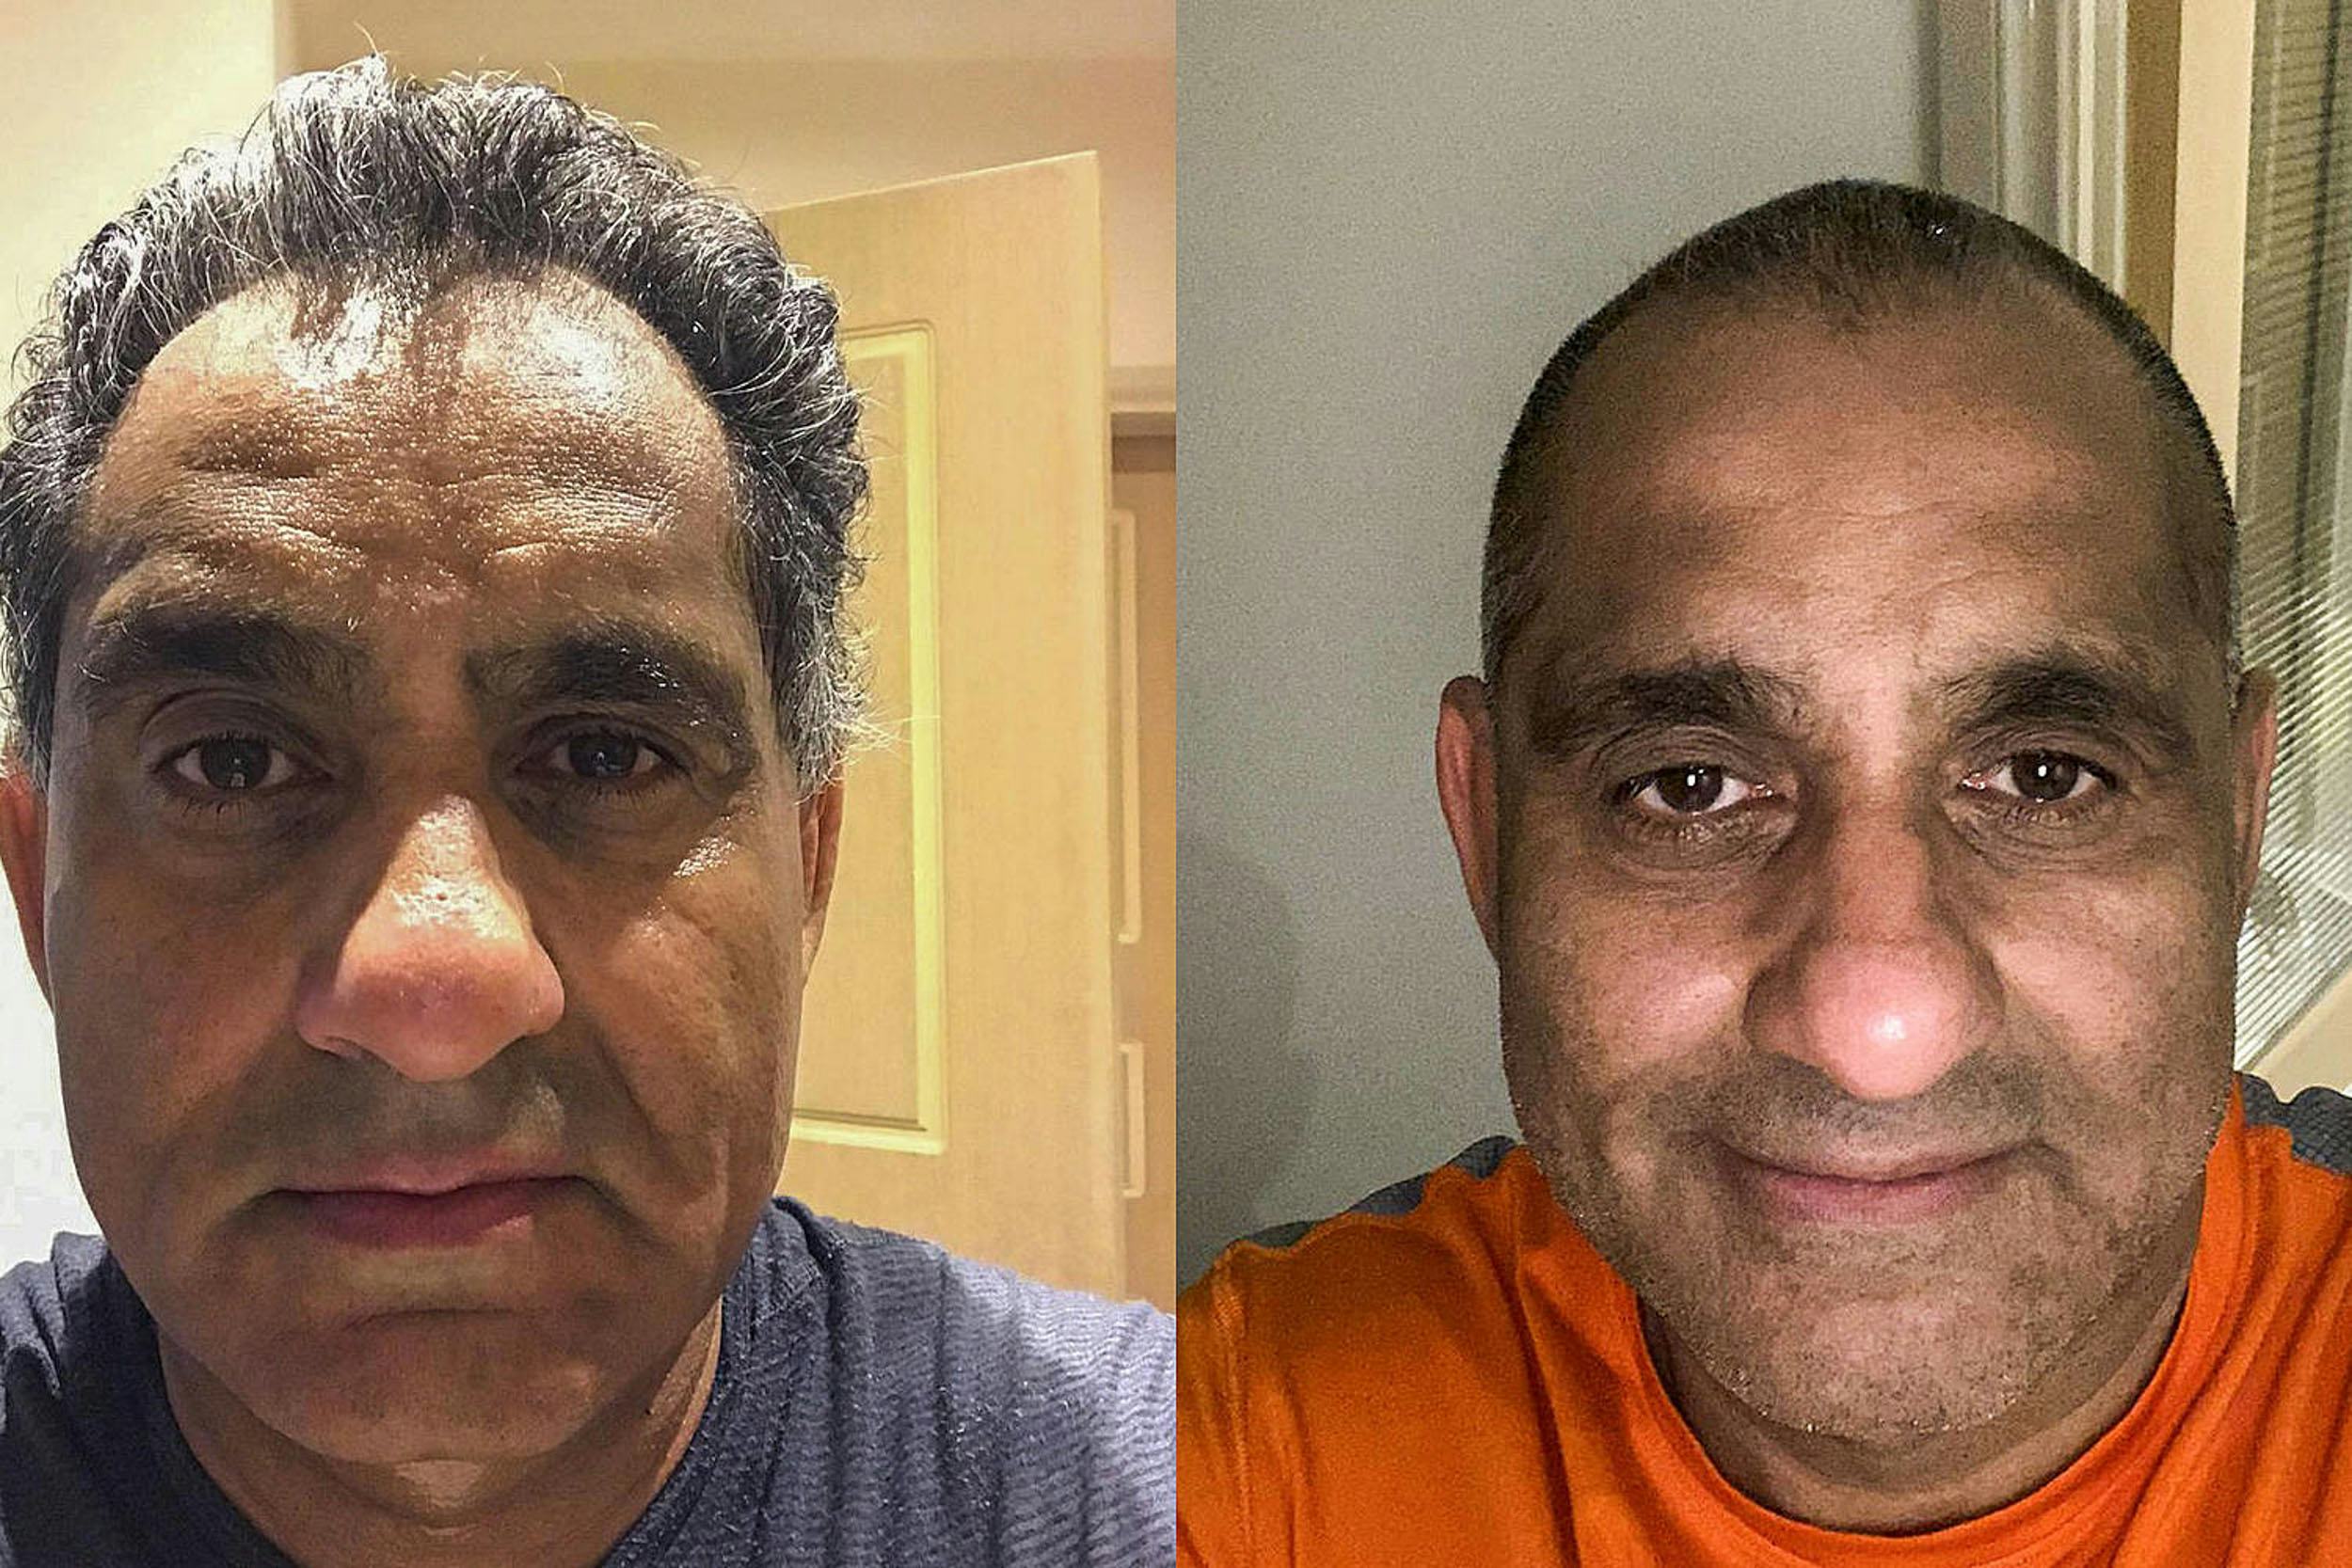 Chairman Shaves for Charity